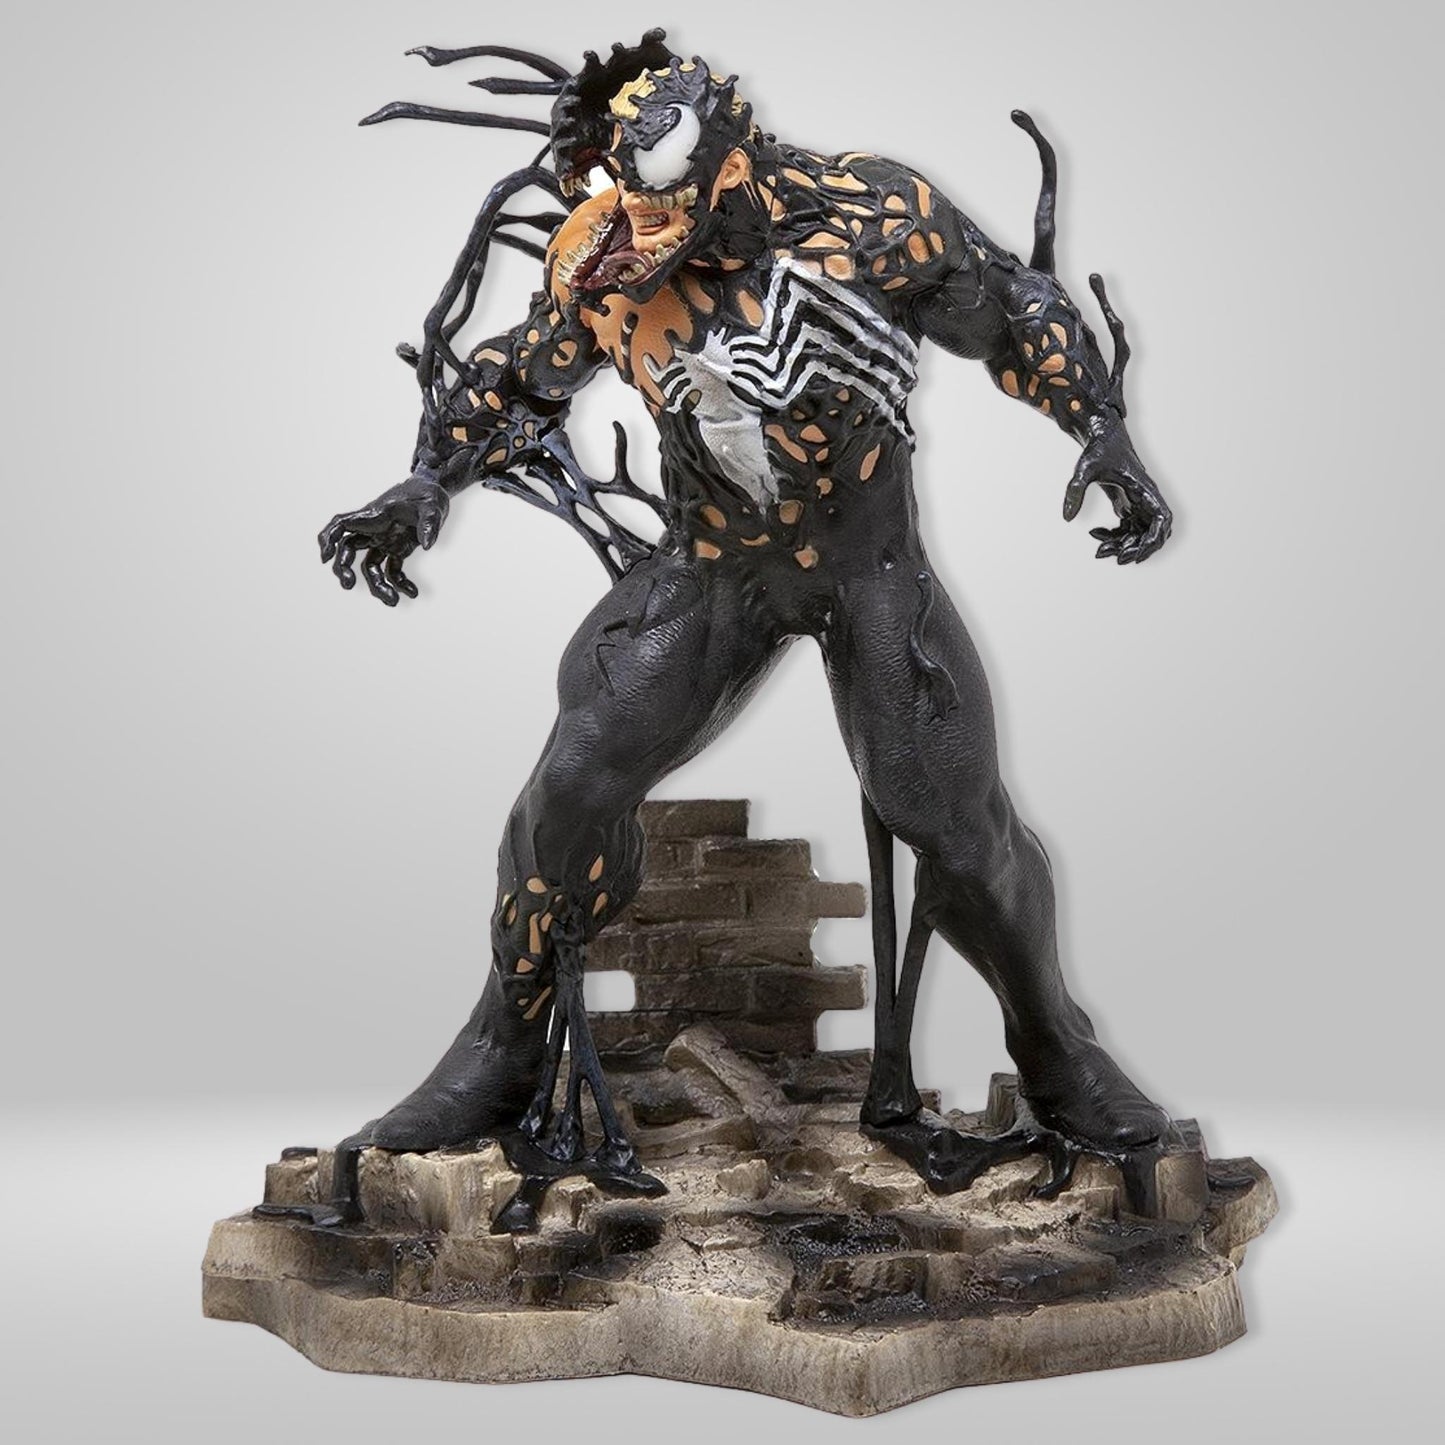 Venom Action Figure Anime Model Toy Collection Statue Fan Made Figurine  Gift 